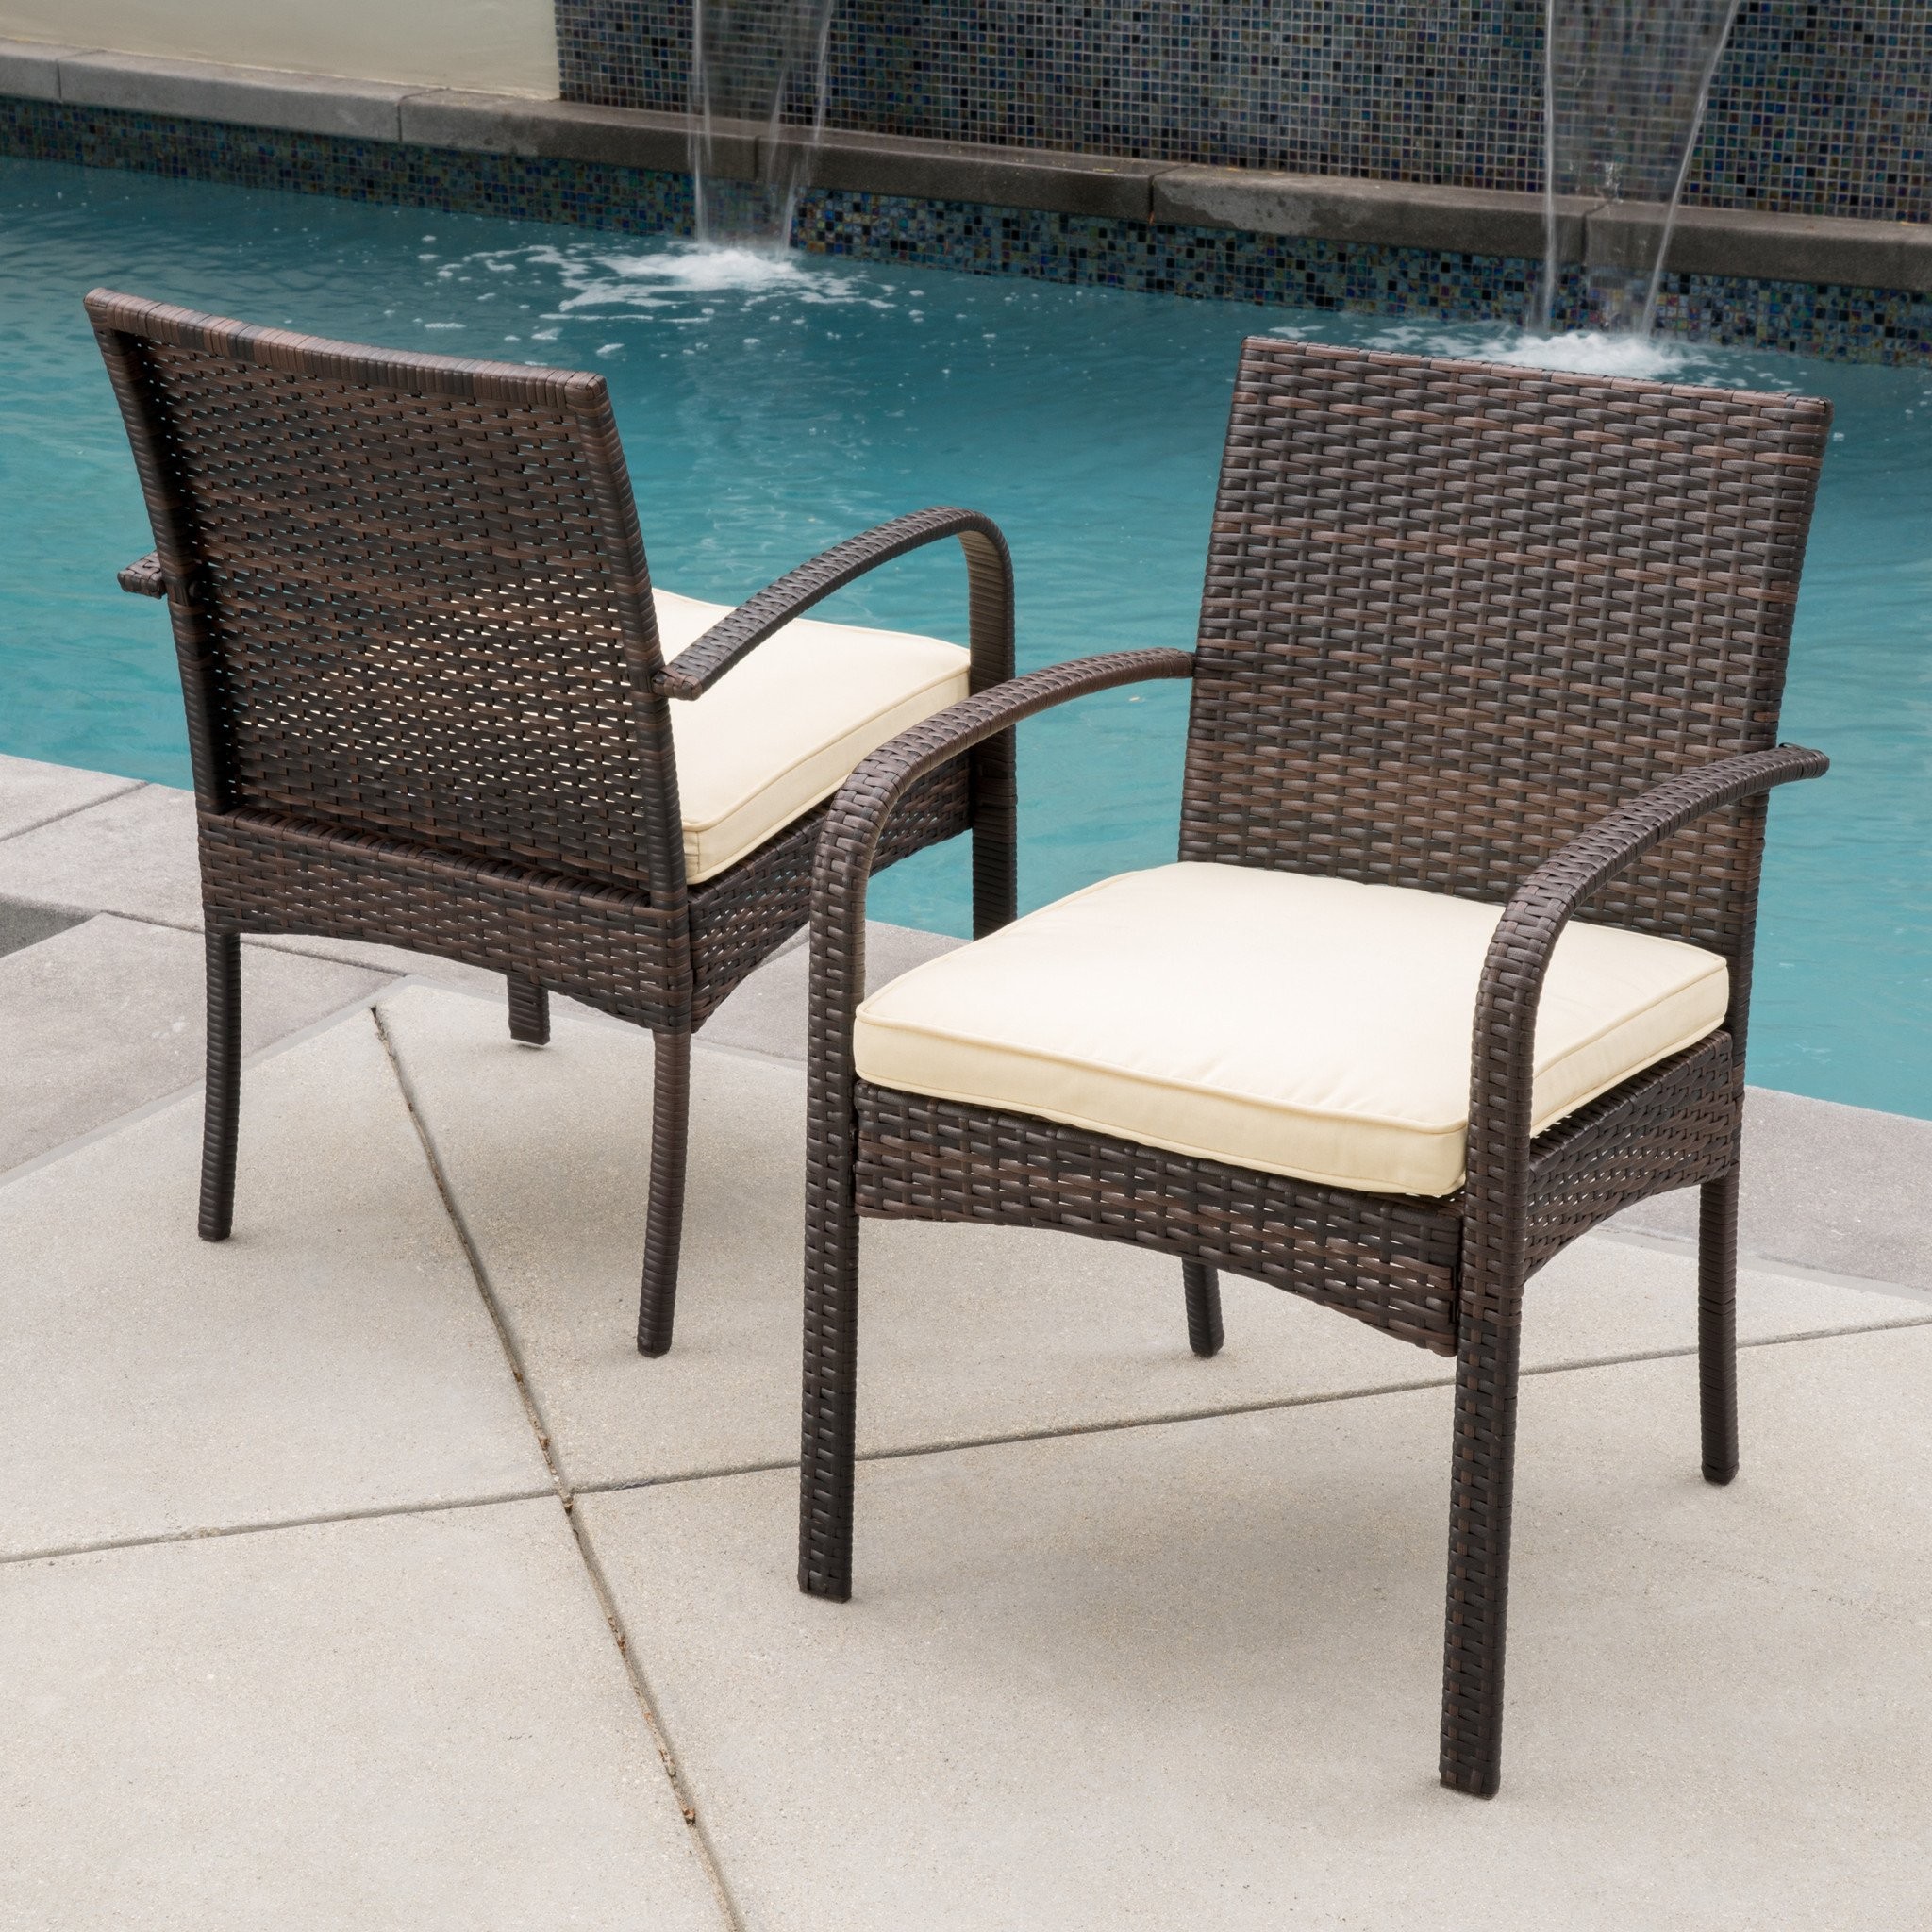 Carmela Outdoor Multibrown PE Wicker Dining Chairs...